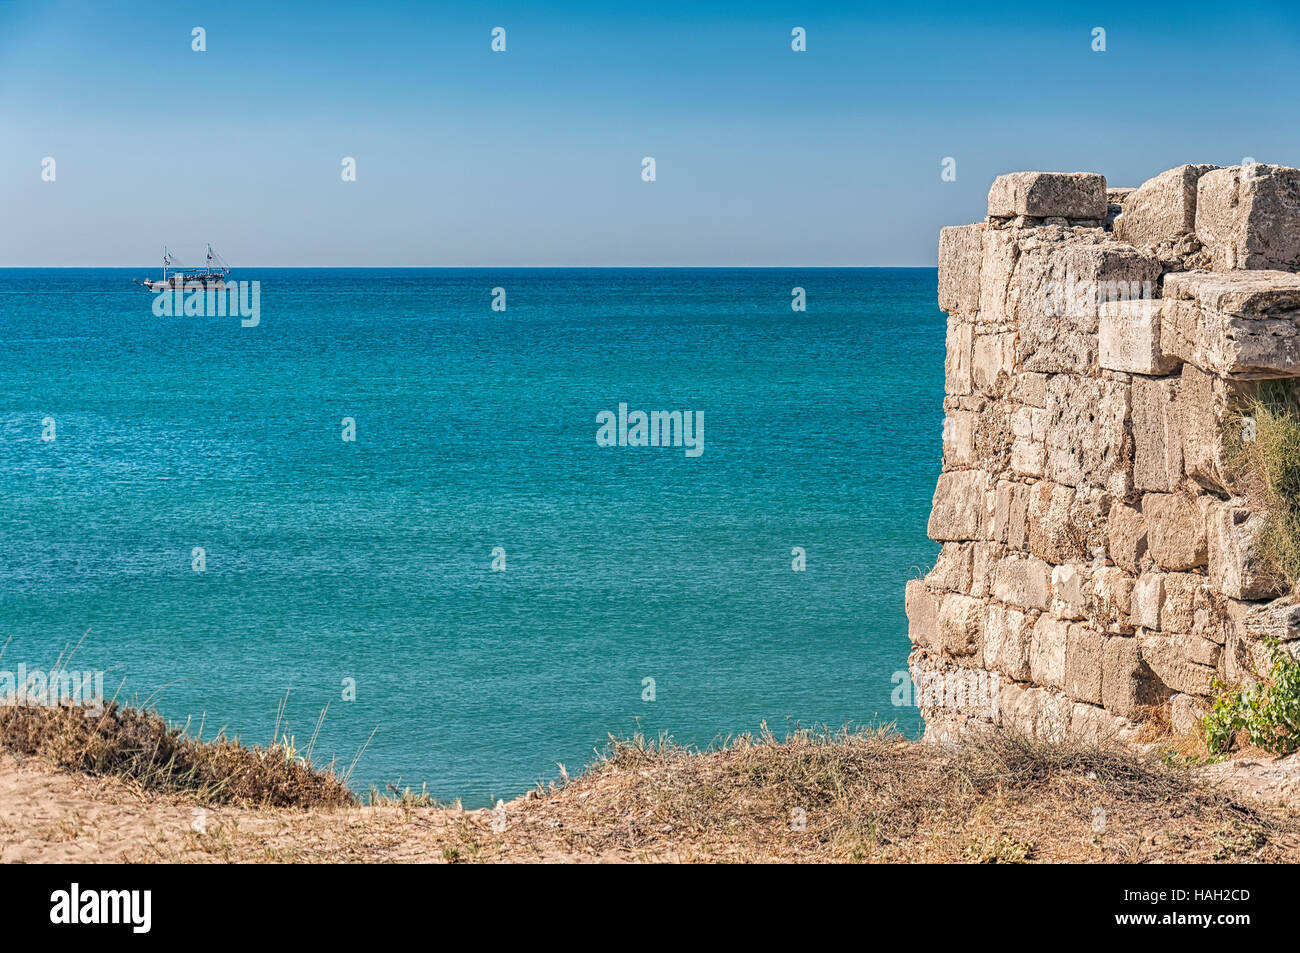 Part of the ancient city wall ruins that surround the town of Side in Turkey. Stock Photo